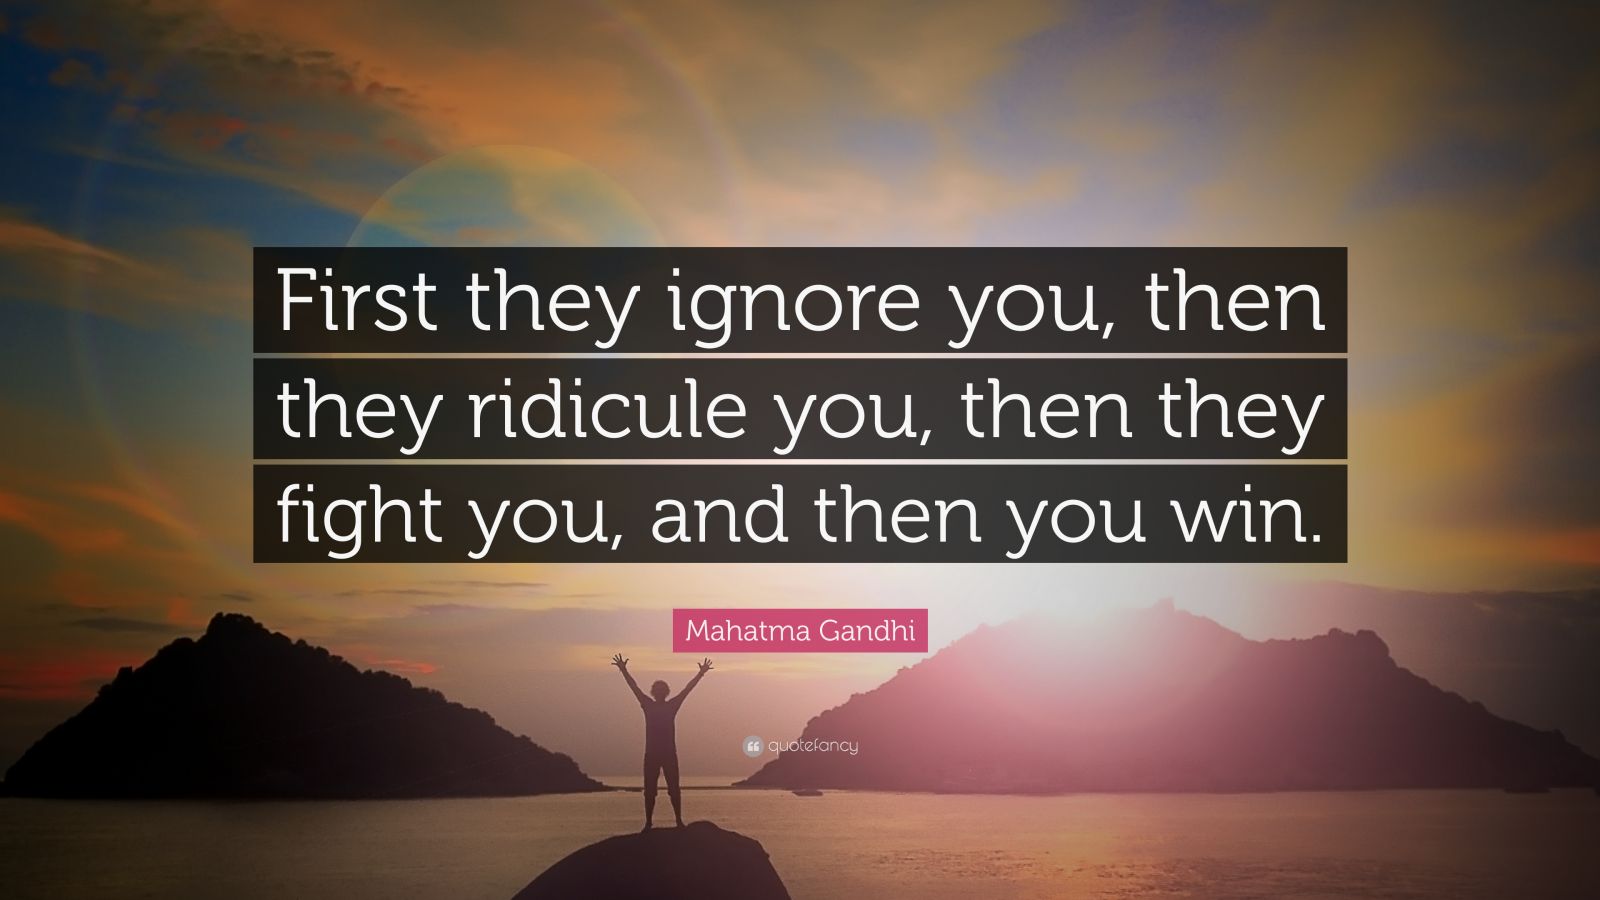 Mahatma Gandhi Quote: “First they ignore you, then they ridicule you